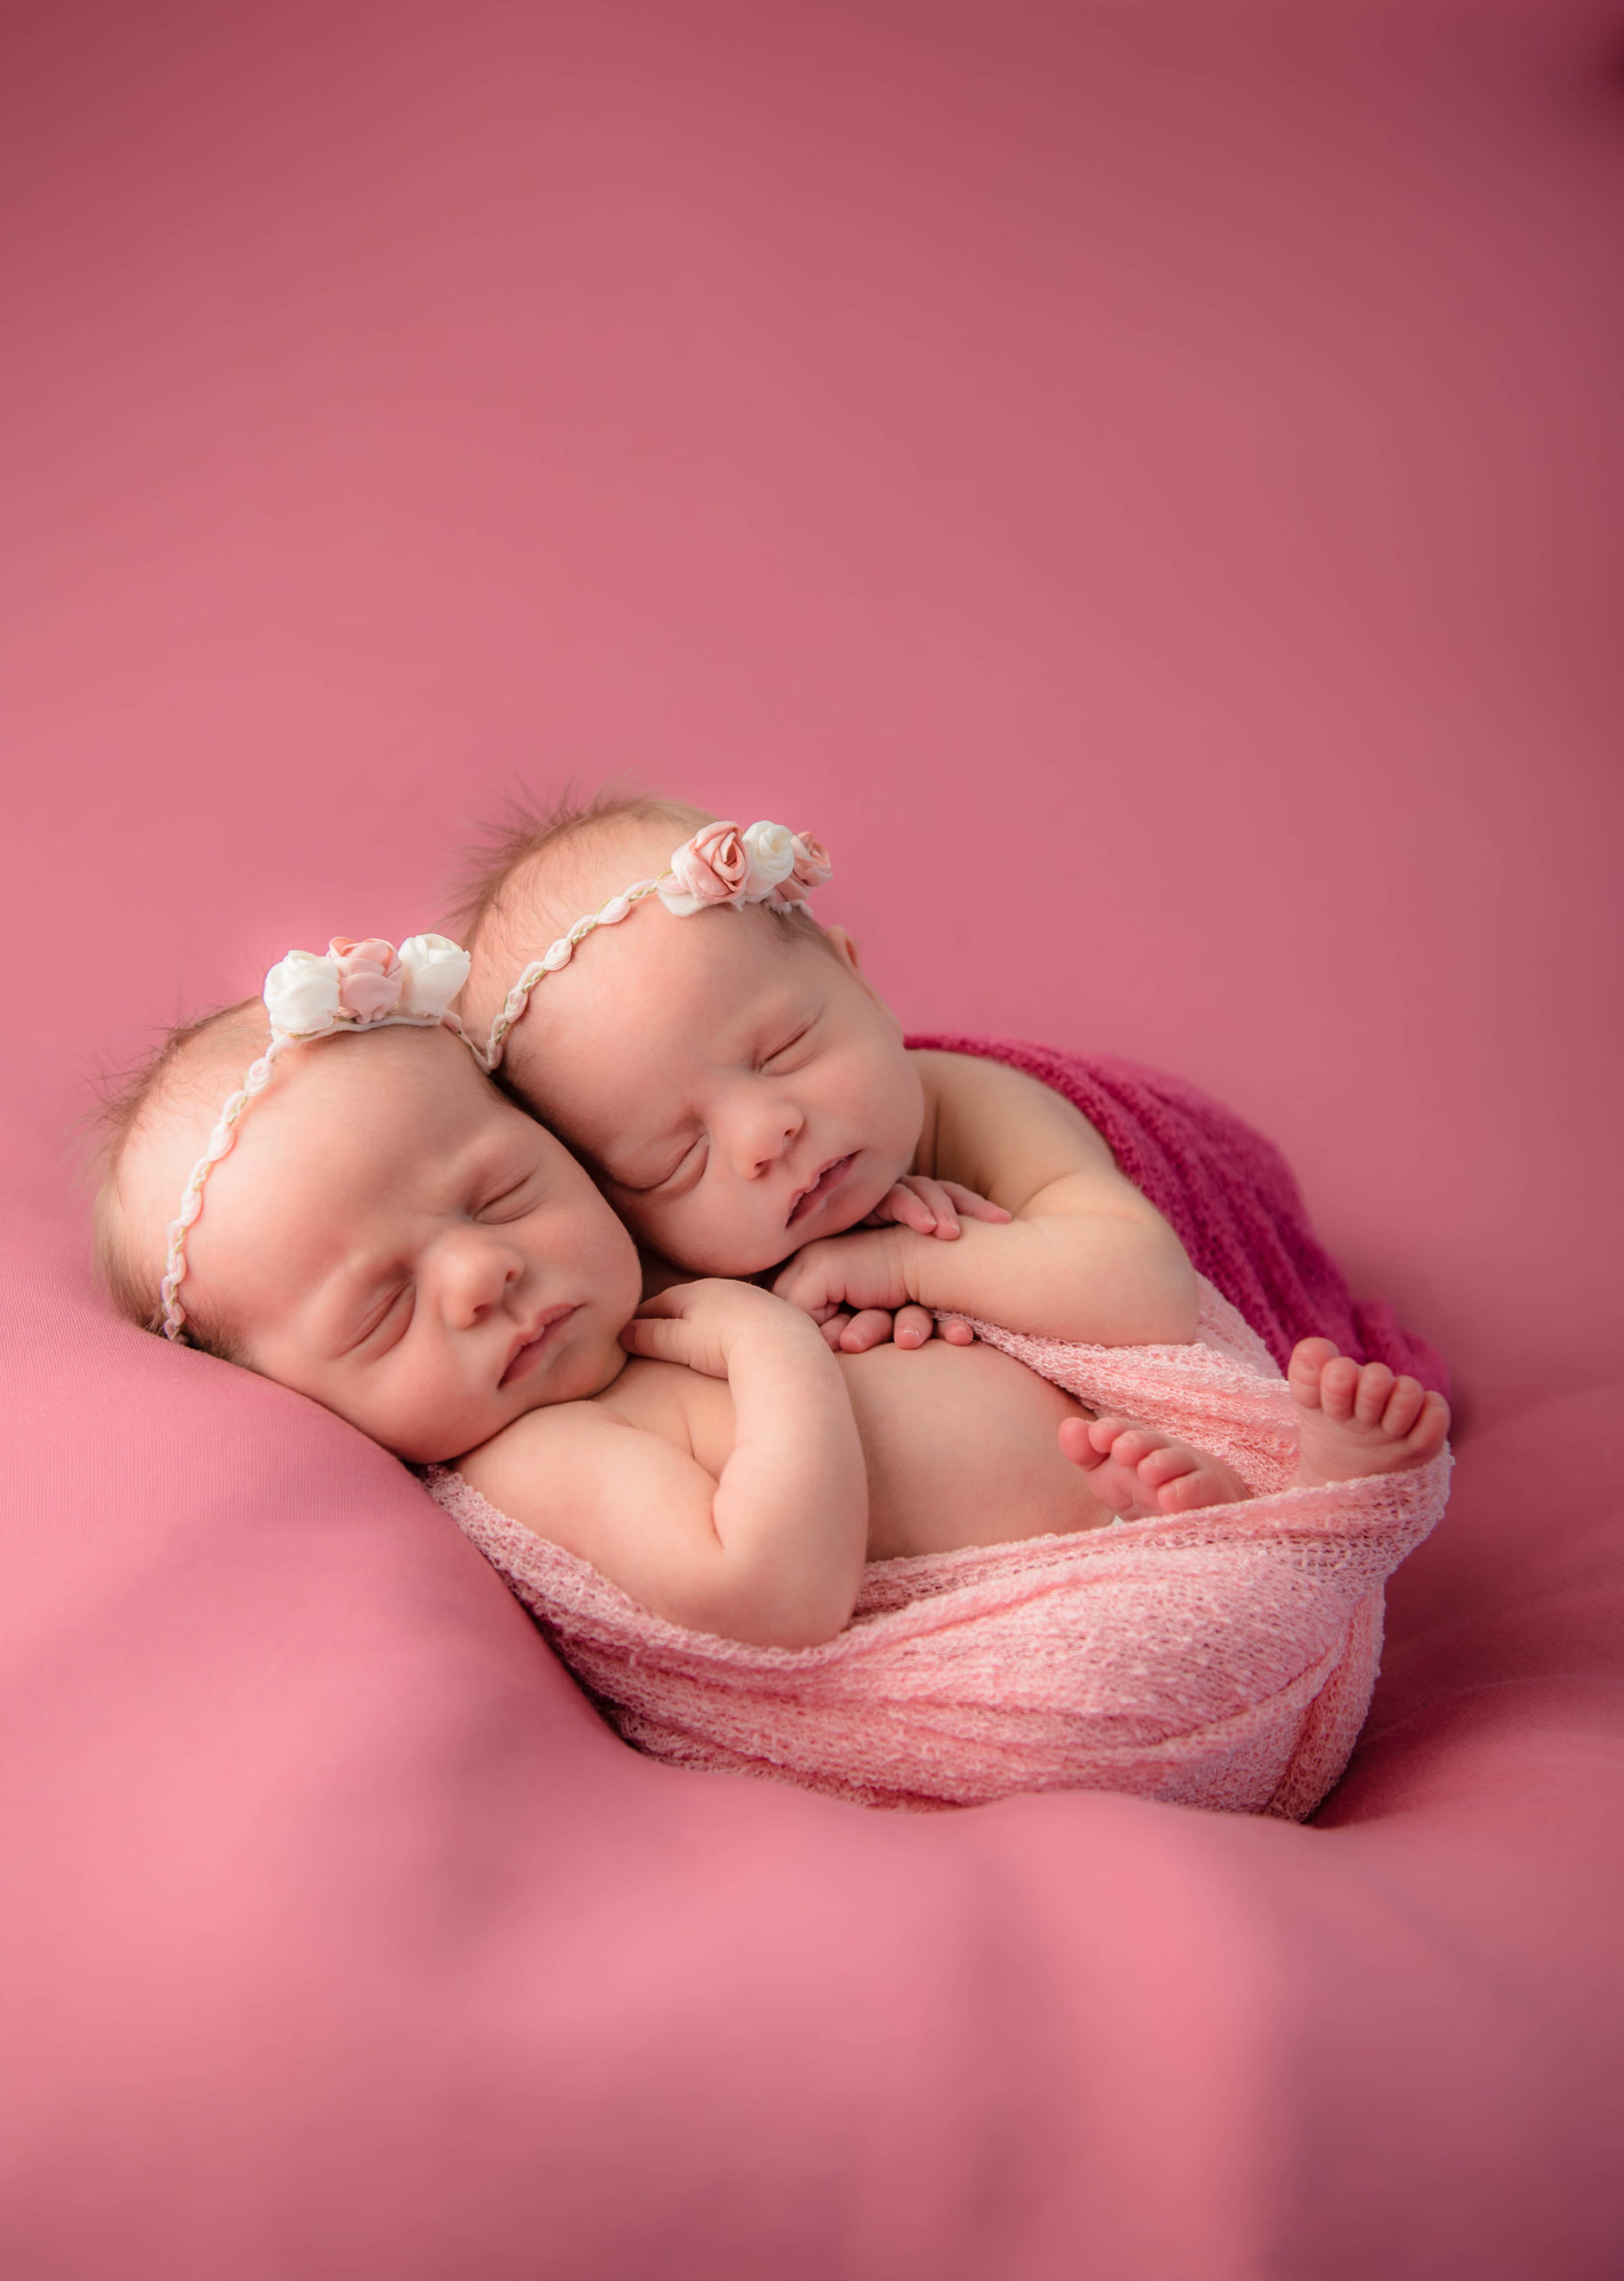 Twins in Pink Asleep Together Mishawaka Indiana Professional Pictures